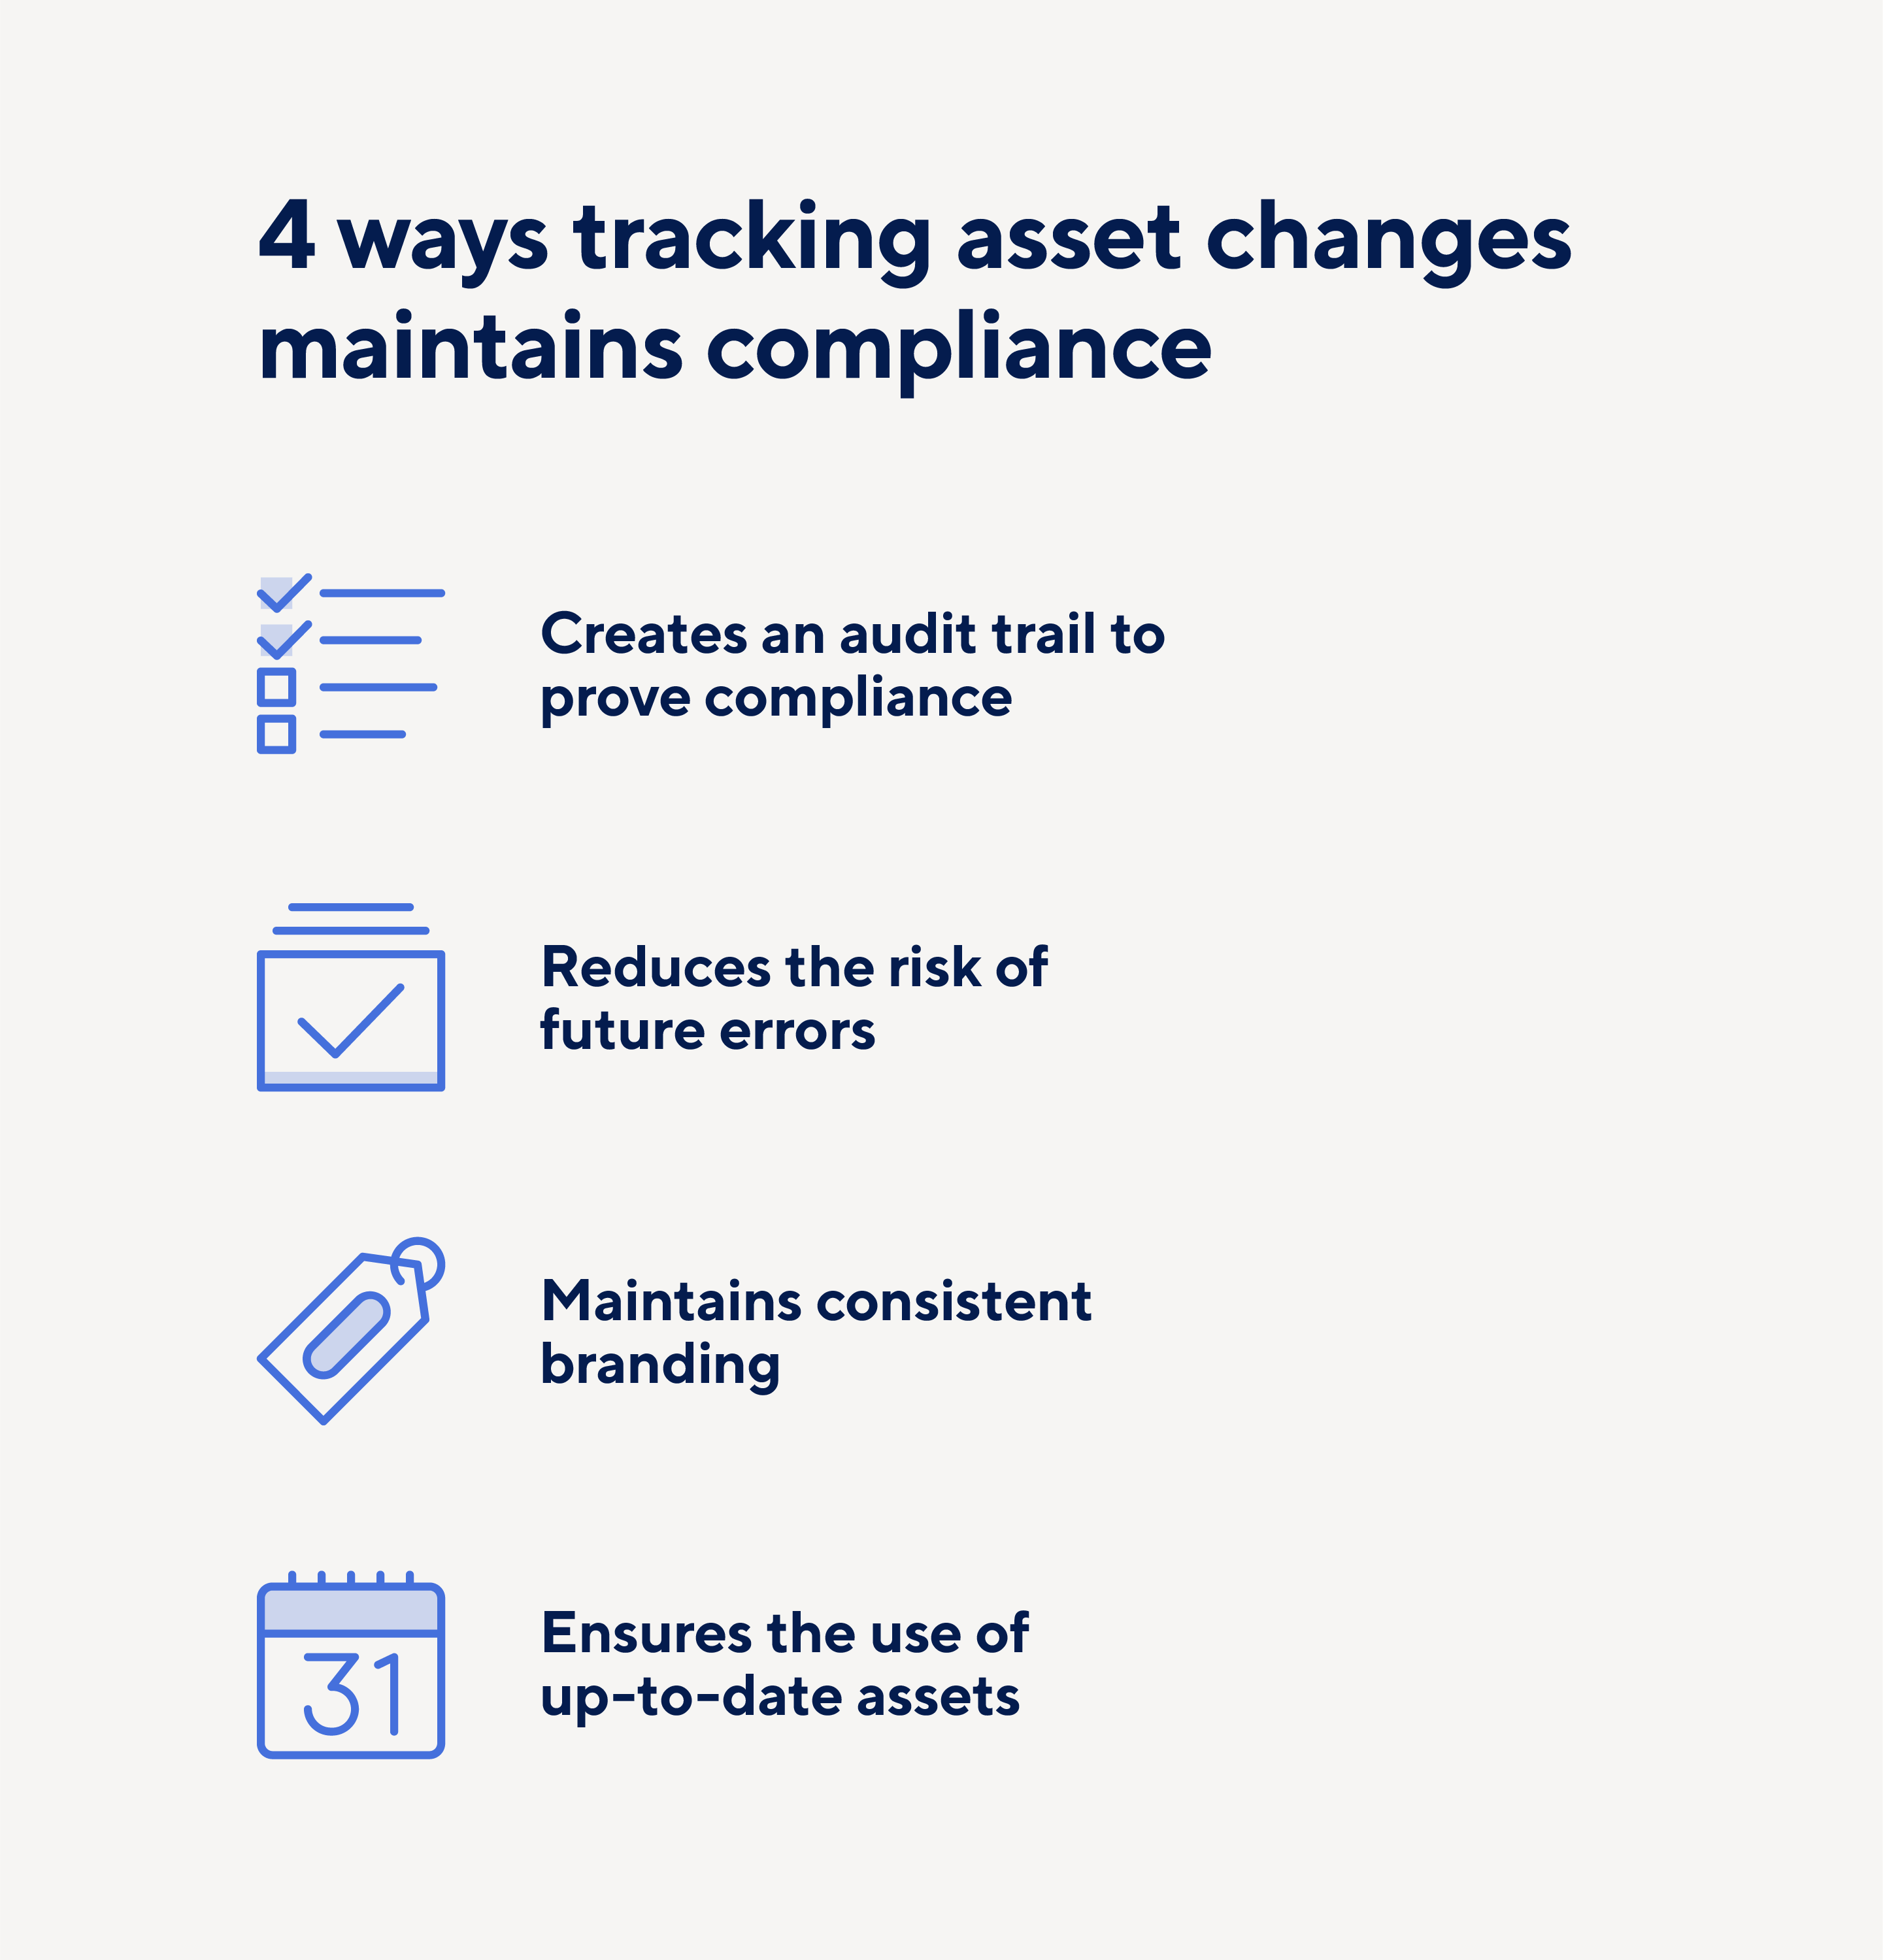 Ways tracking asset changes helps maintain brand compliance.